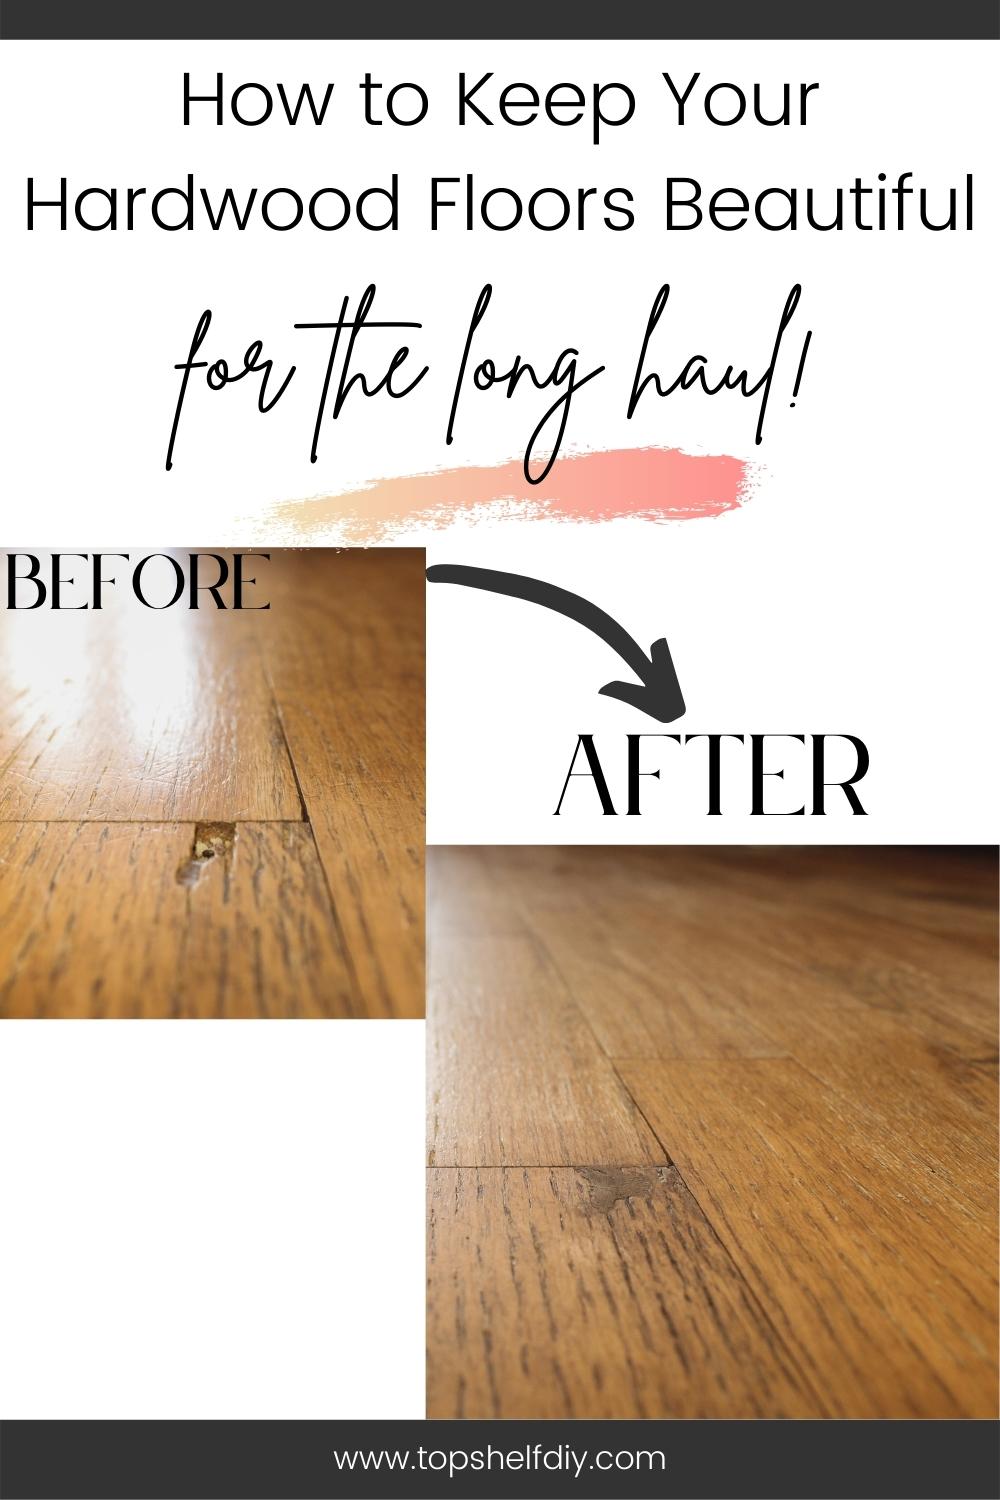 Oops you did it again. Left a big dent in your hardwood floors, that is. Here's how to patch holes, refinish your floors, and maintain the beauty of a natural wood surface for many years to come. #hardwoodfloors #flooring #hardwoodmaintenance